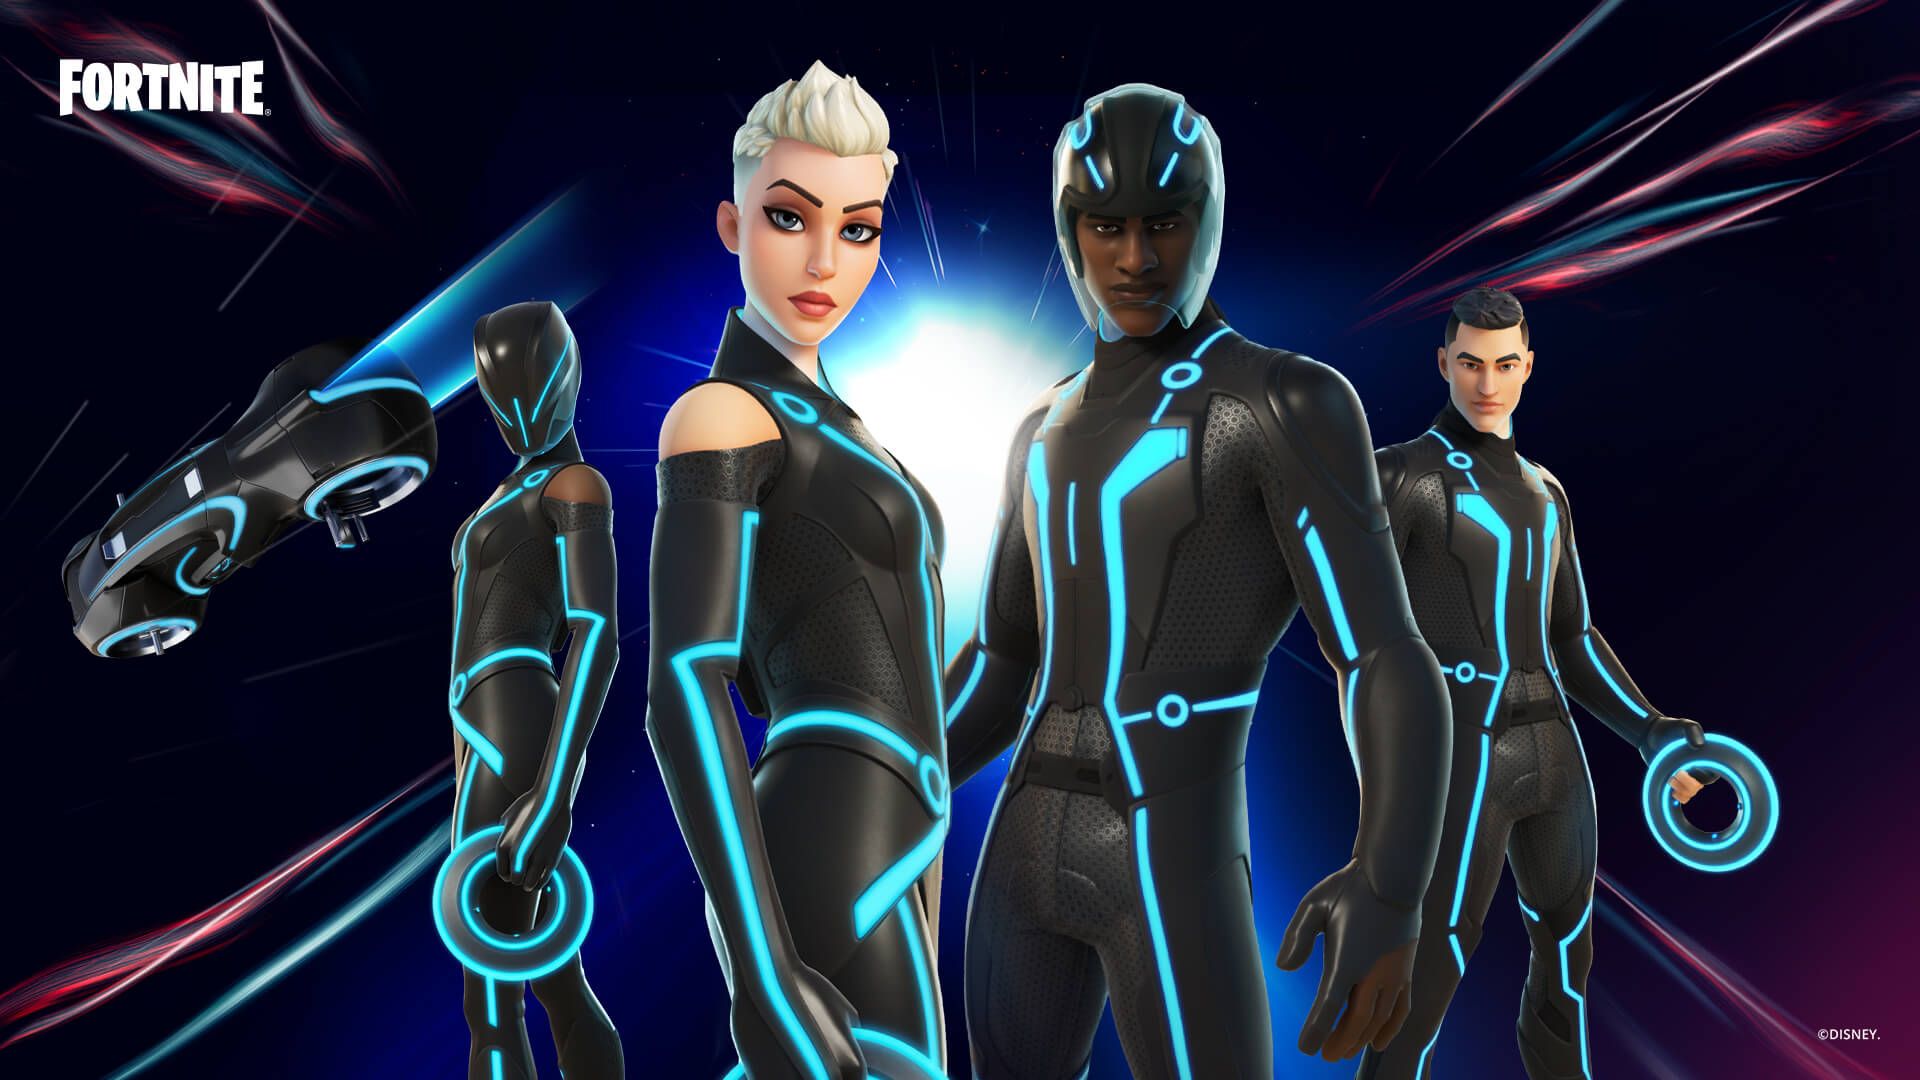 Tron Outfits Arrive in Fortniteepicgames.com